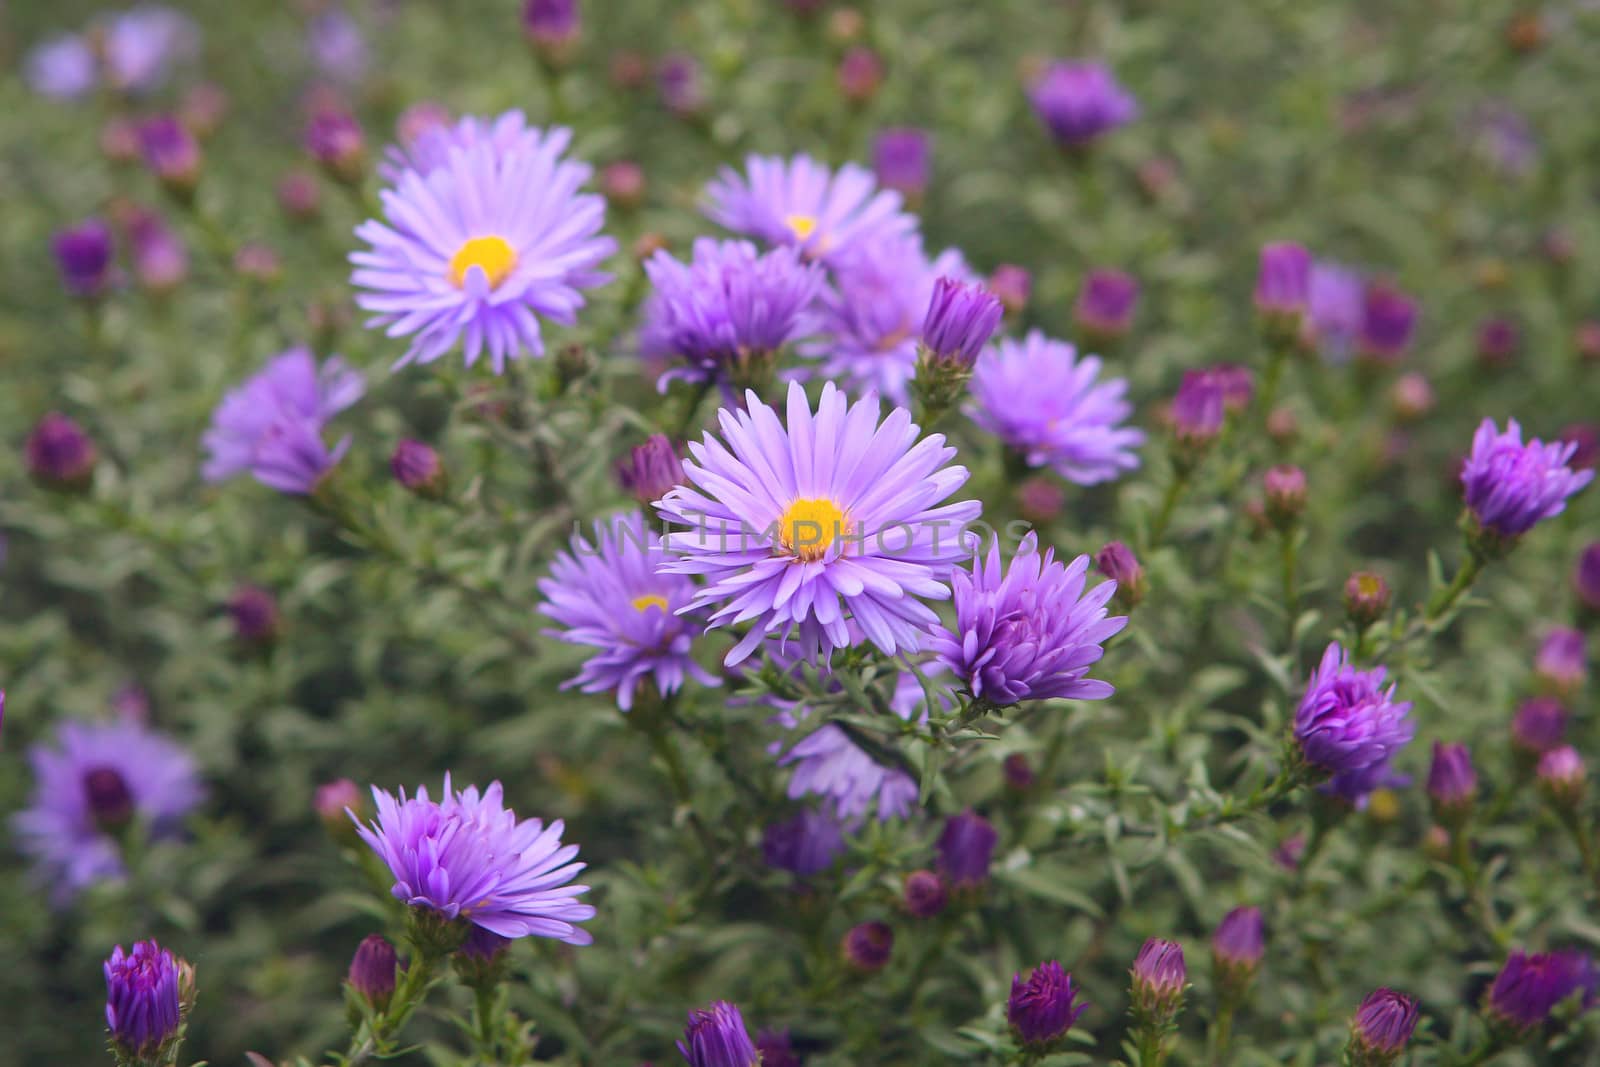 Blue Asters flowers in the Autumn Garden